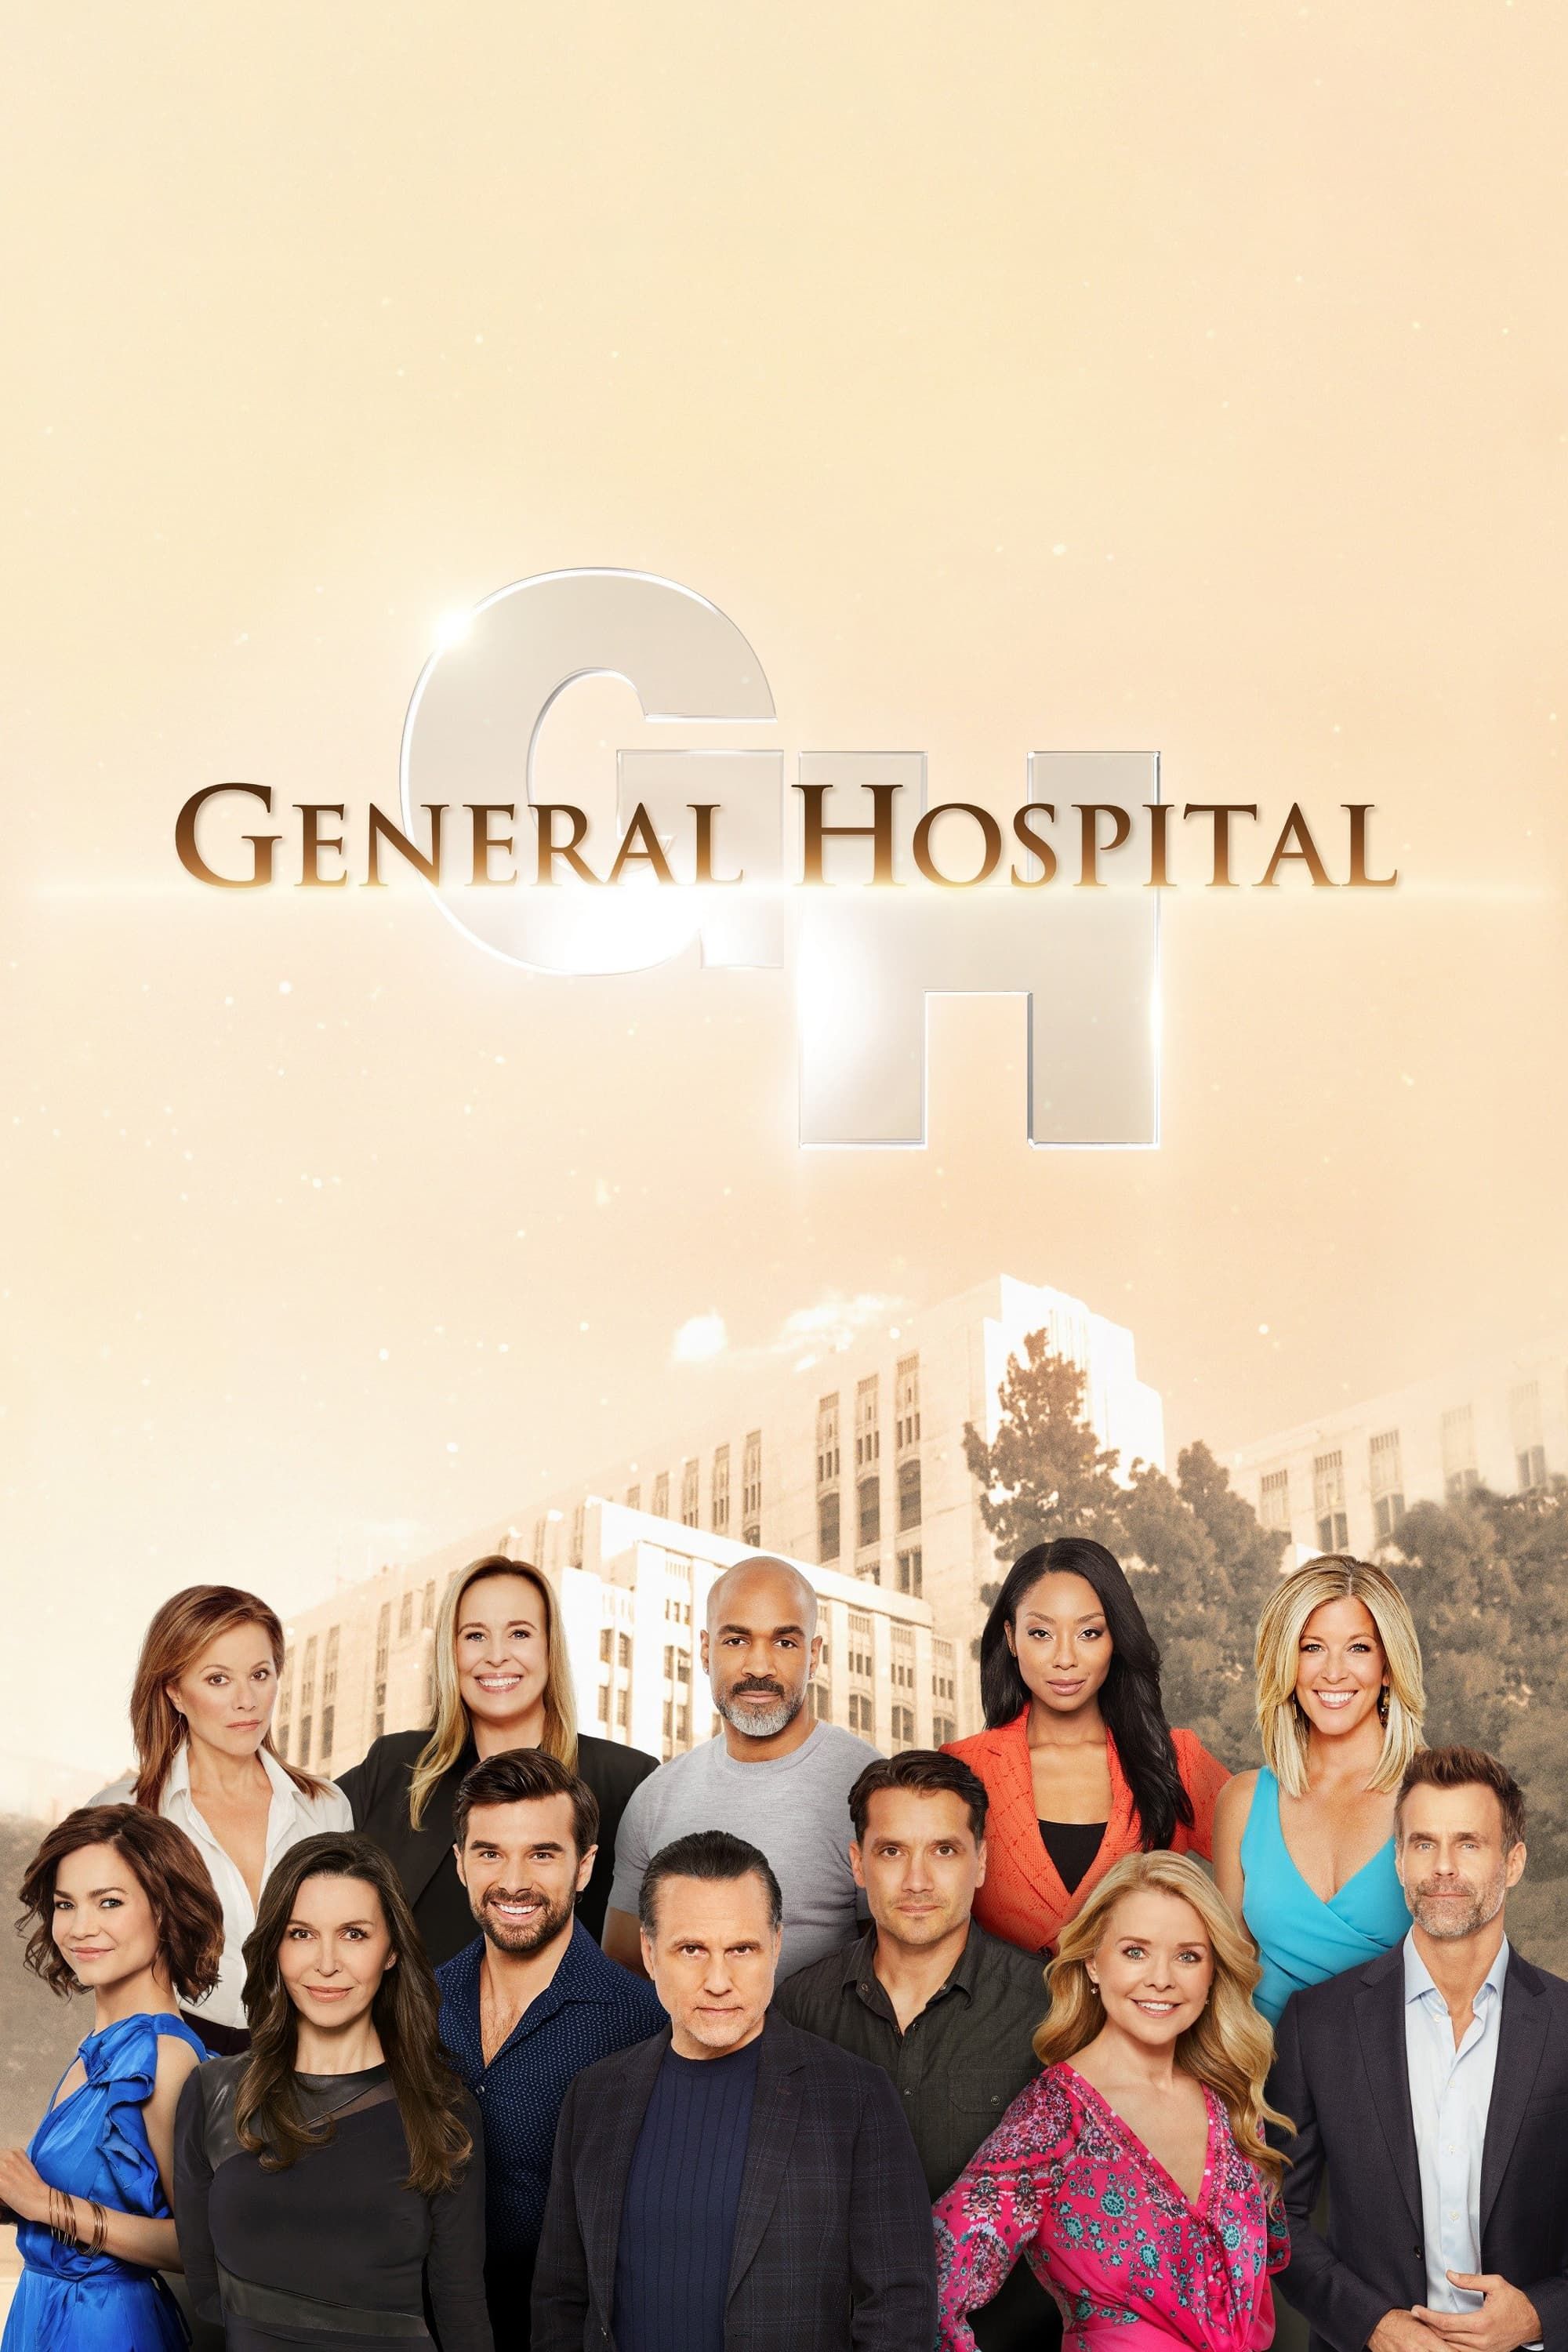 The poster for General Hospital